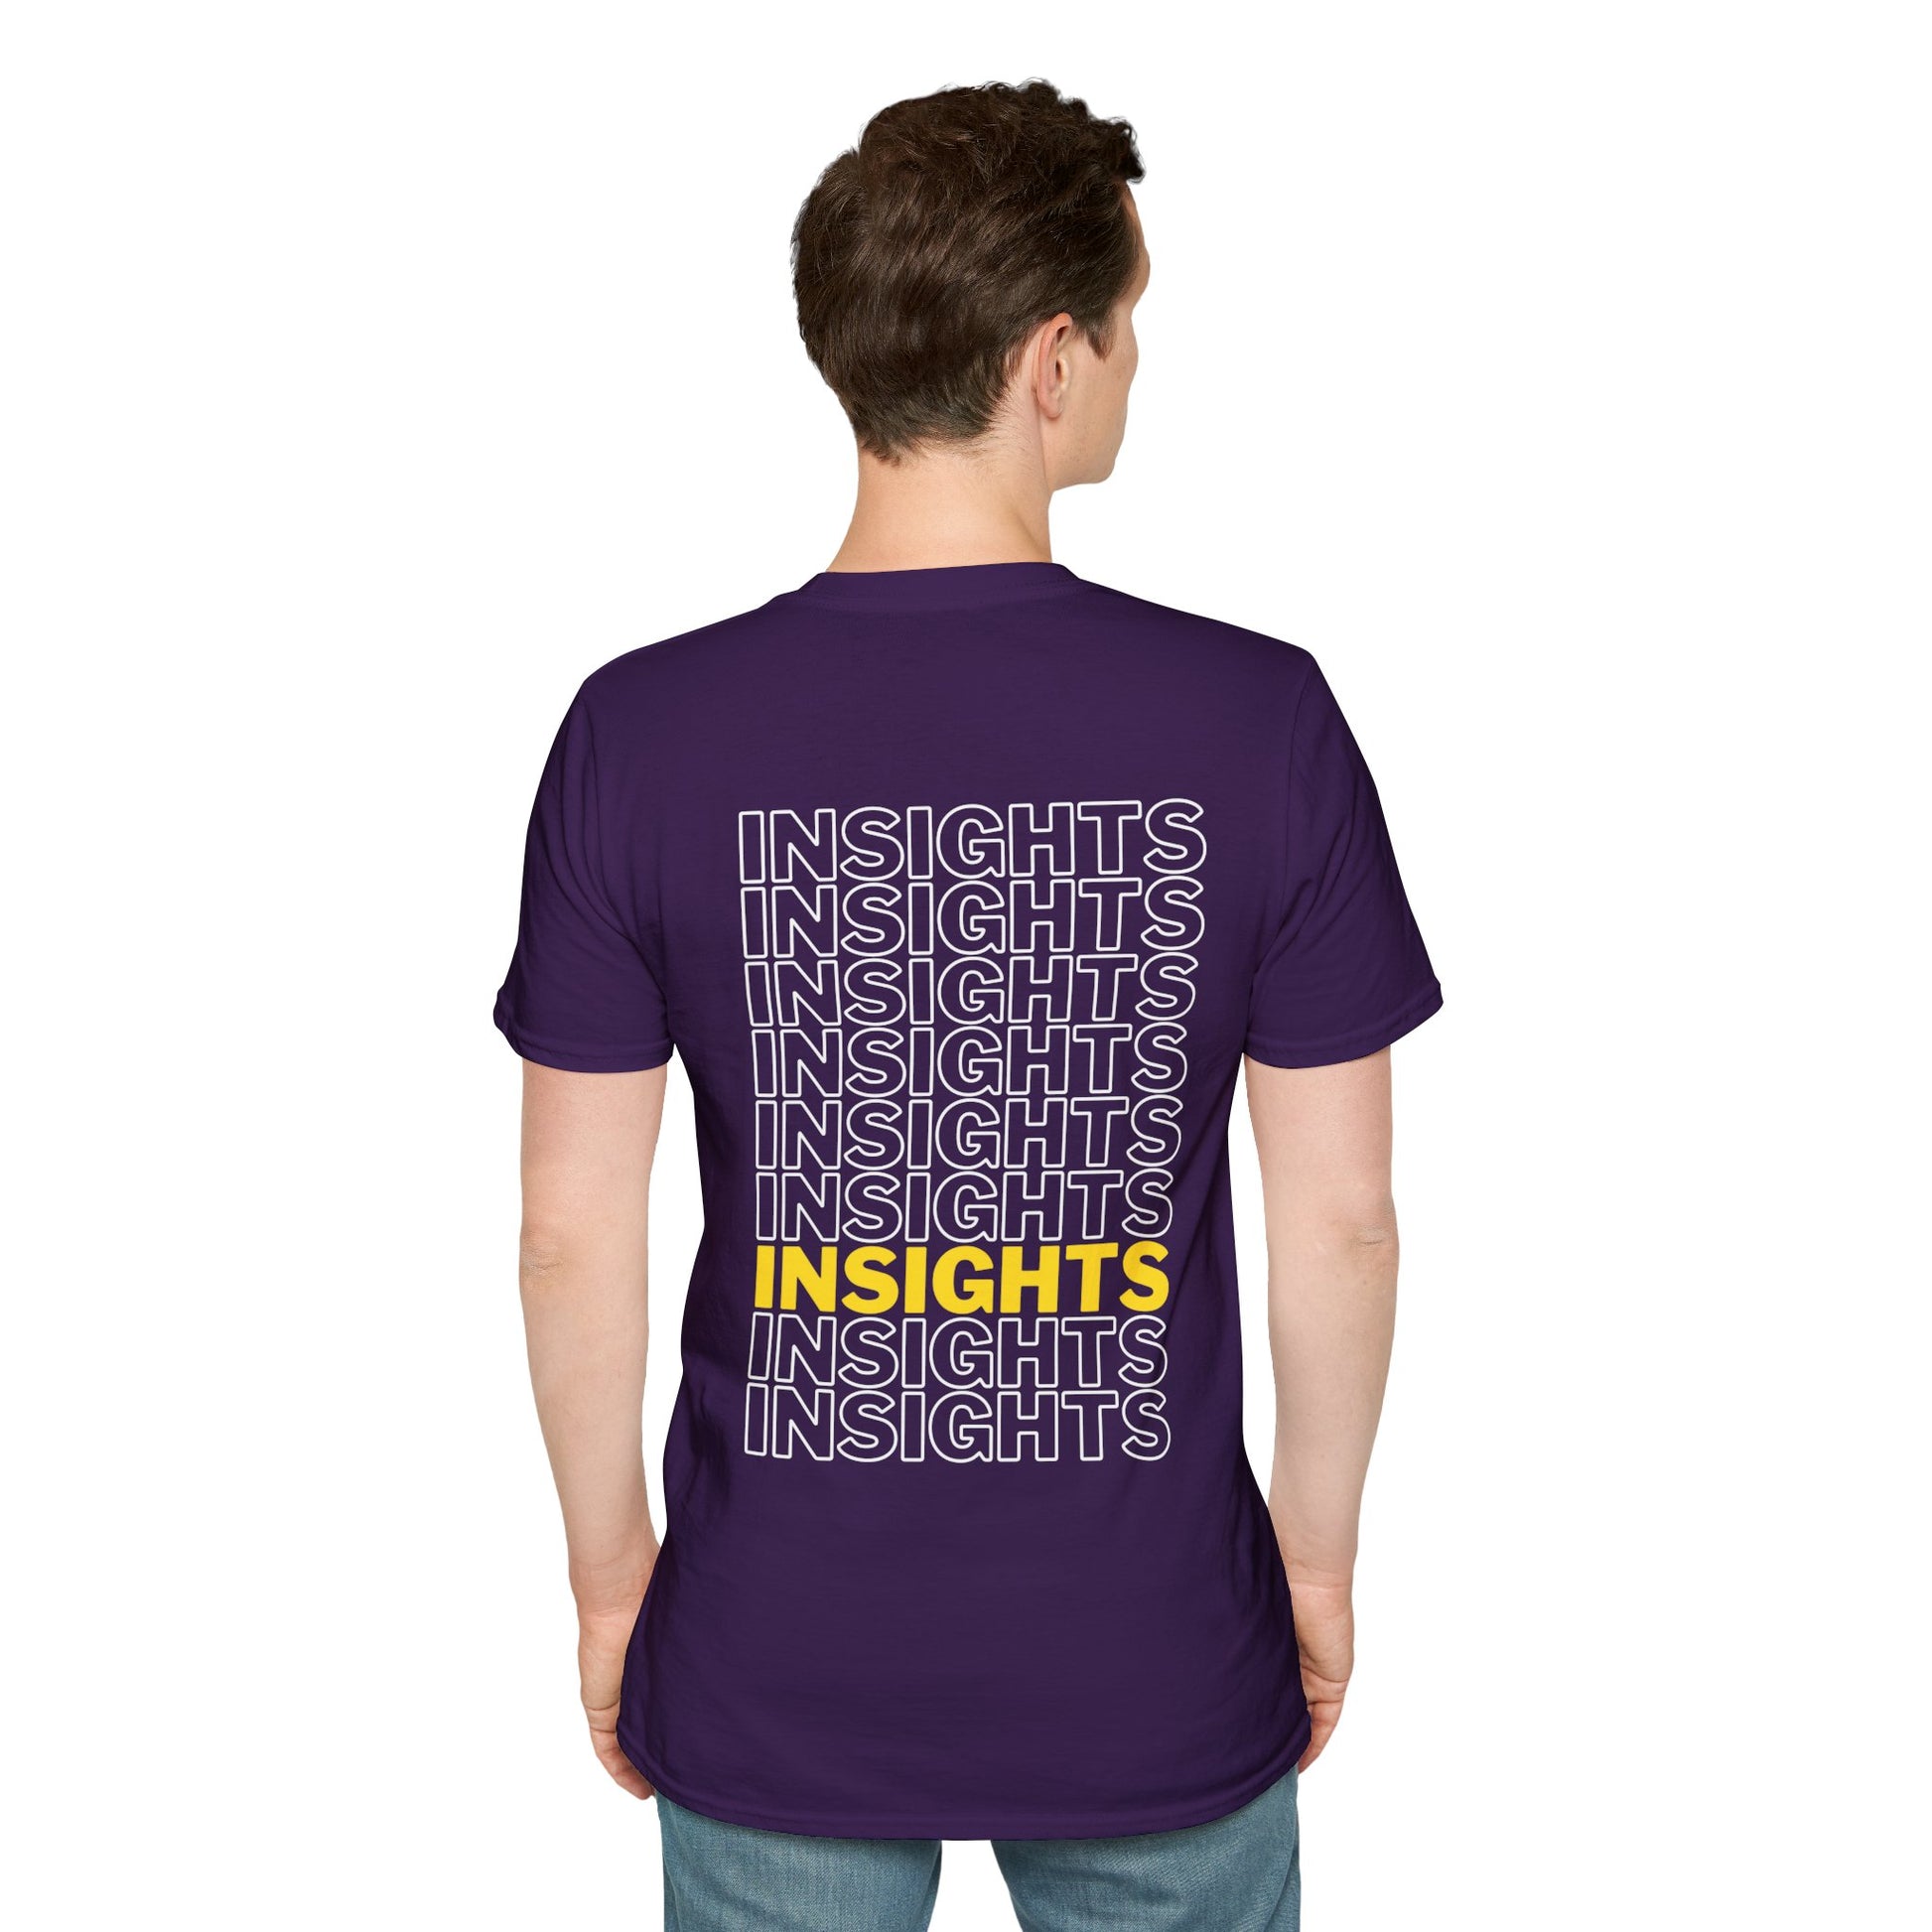 Violet  T-shirt with the word ‘INSIGHTS’ repeated in white text and one instance highlighted in yellow